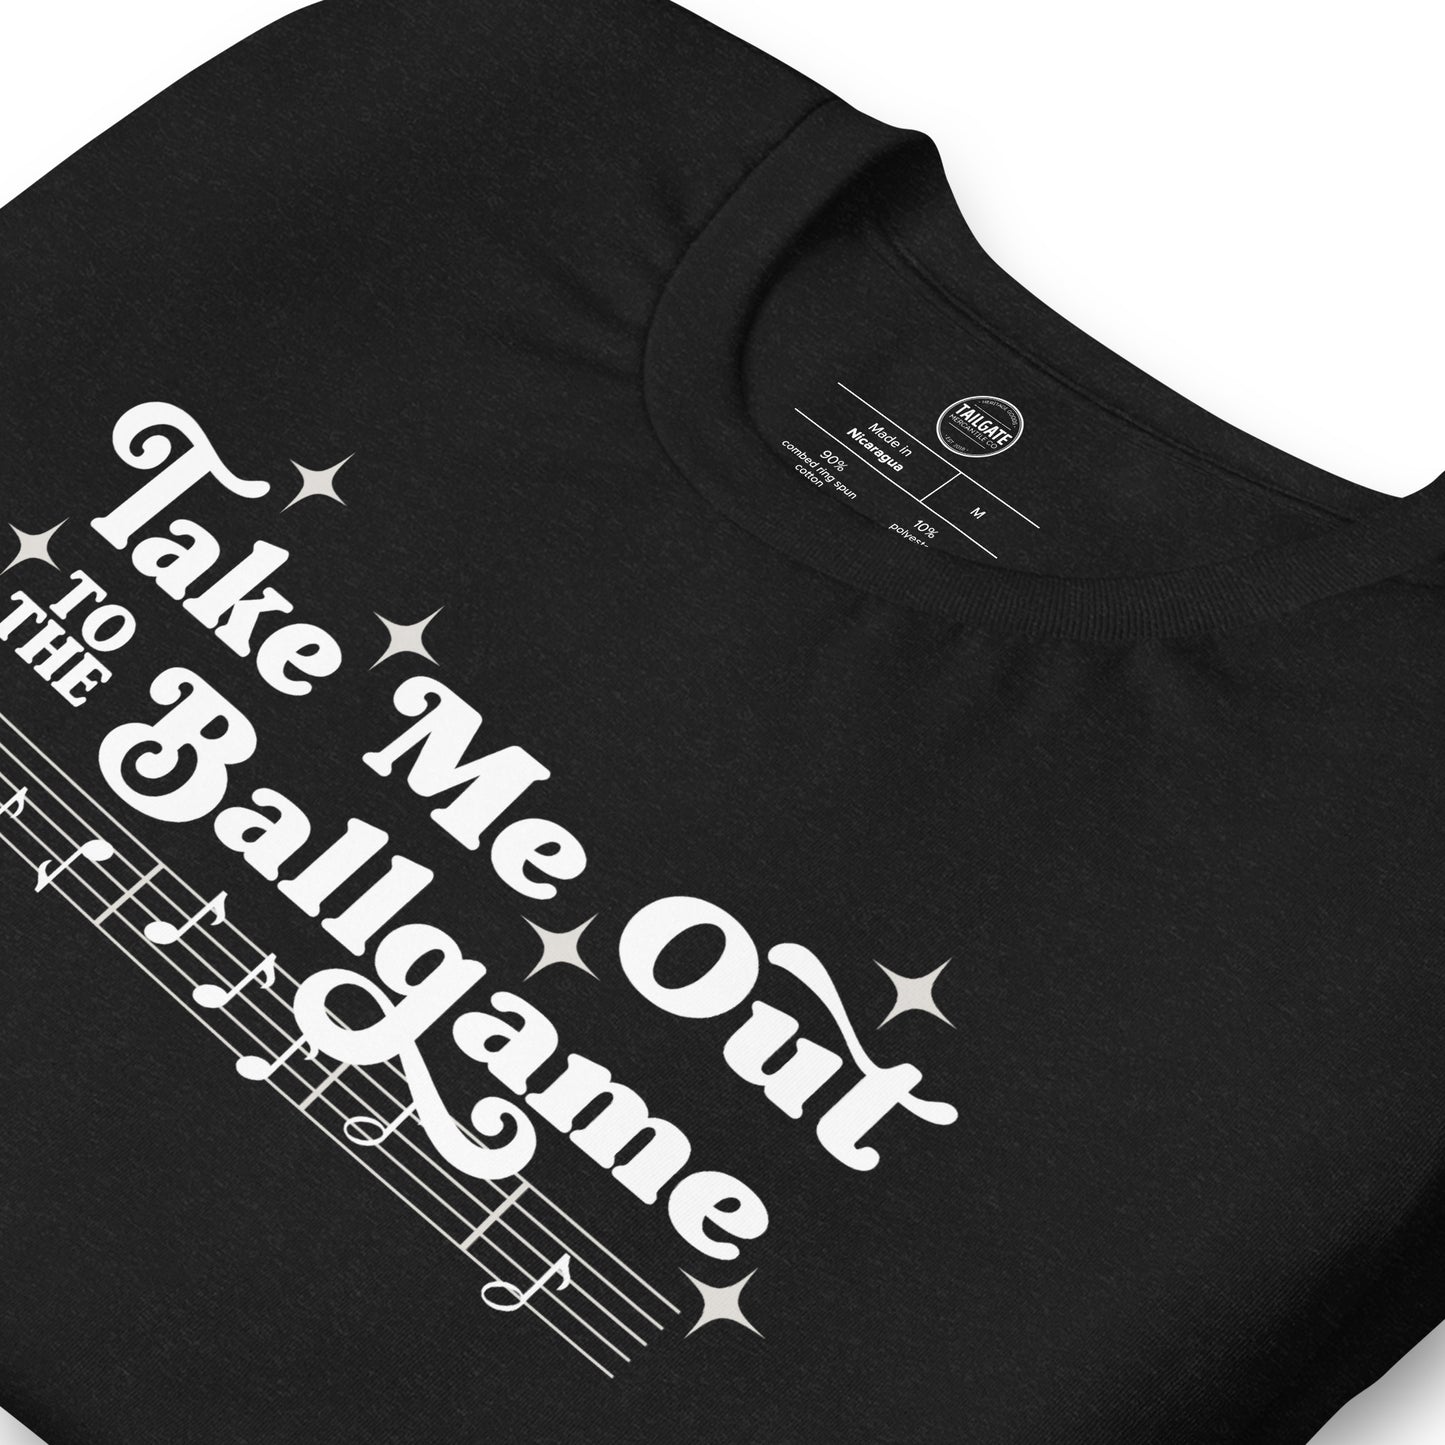 Close up image of heather black t-shirt with design of "Take Me Out to the Ballgame" with coordinating musical notes in white located on centre chest. This design is exclusive to Tailgate Mercantile and available only online.